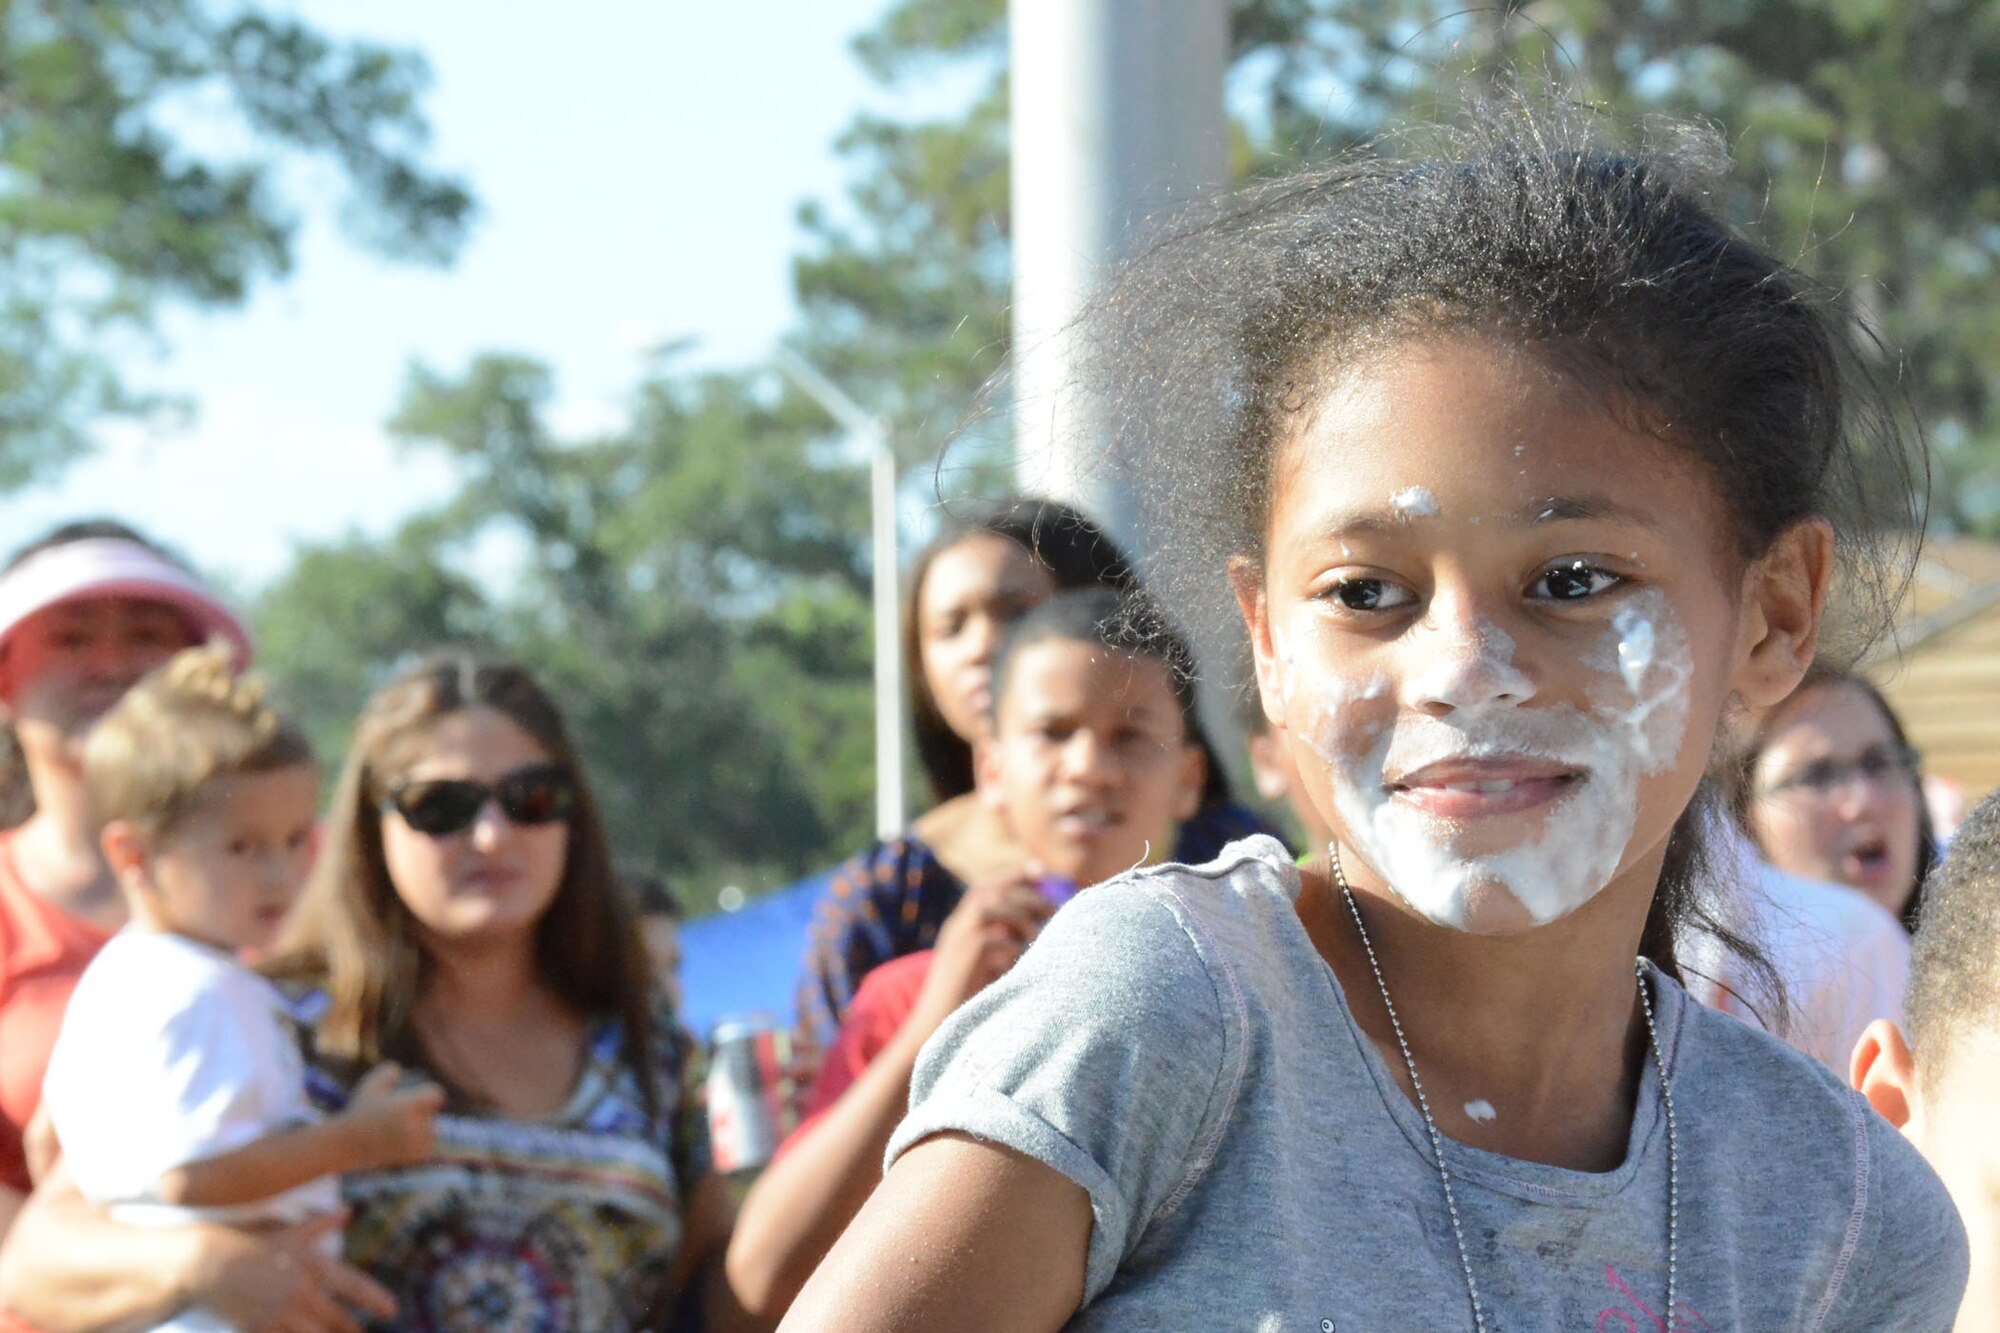 Mariyah King is all smiles after winning the pie-eating contest.(U. S. Air Force photo/Ed Aspera)